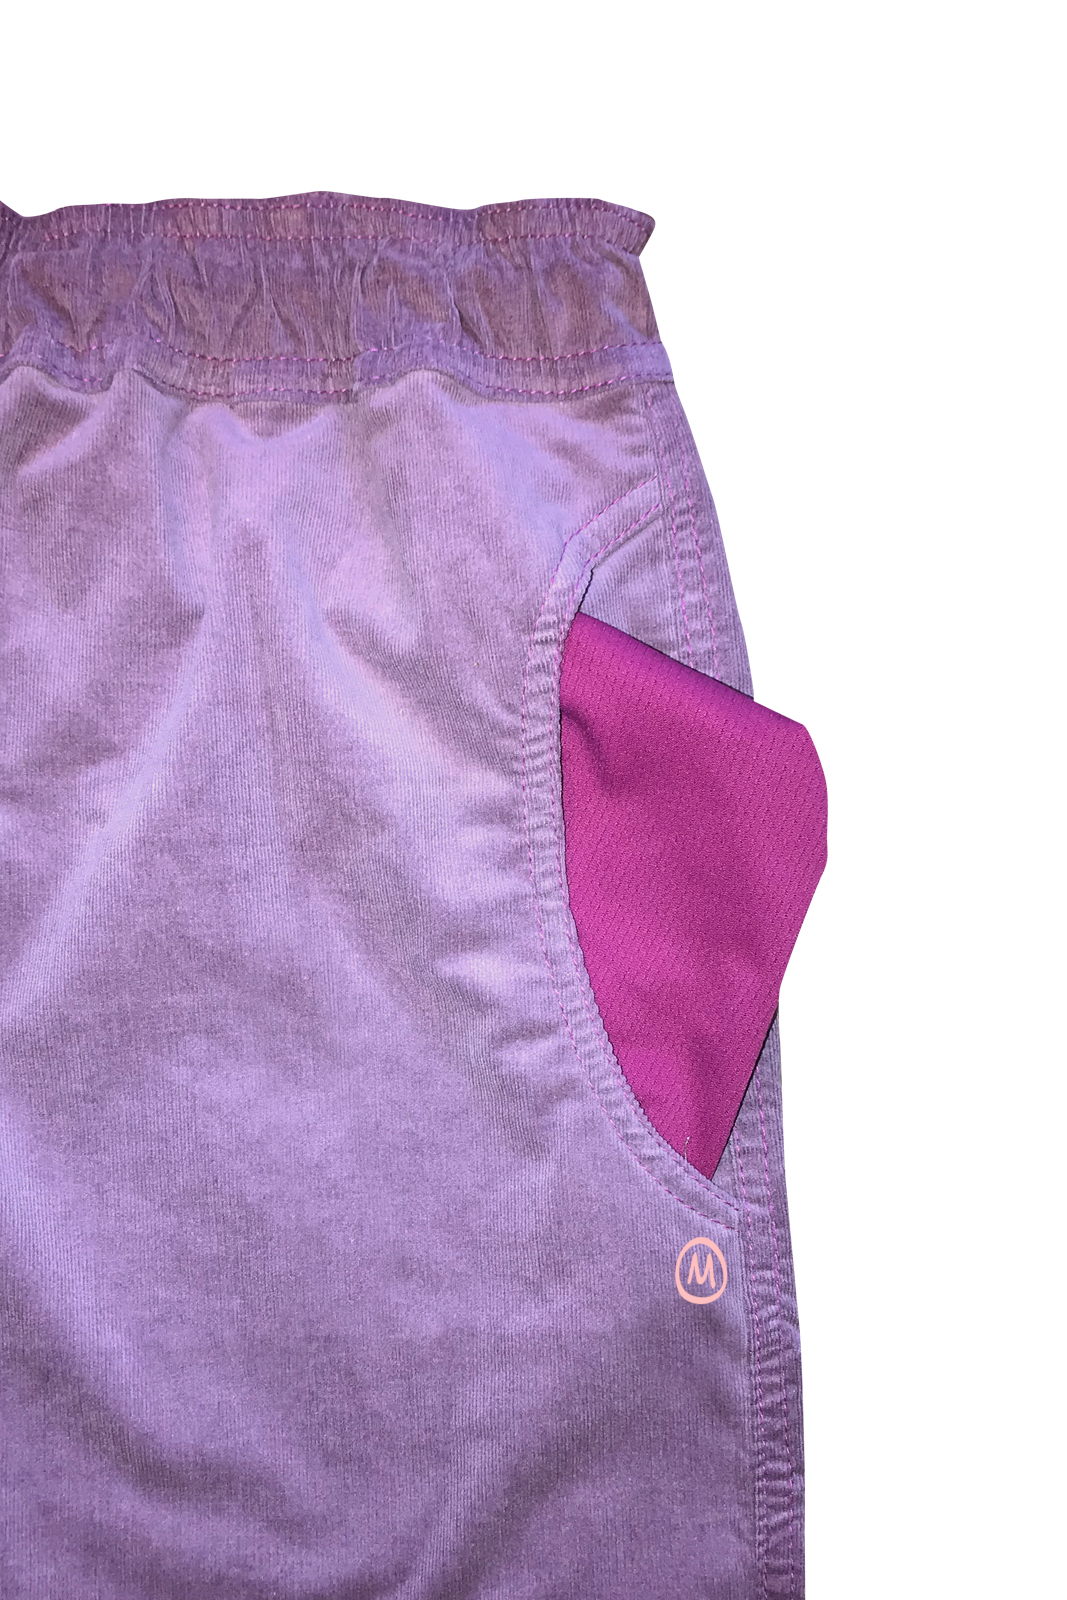 Pantalone arrampicata donna Pin VIOLET ⋆ MONVIC ⋆ Made in Italy with ❤